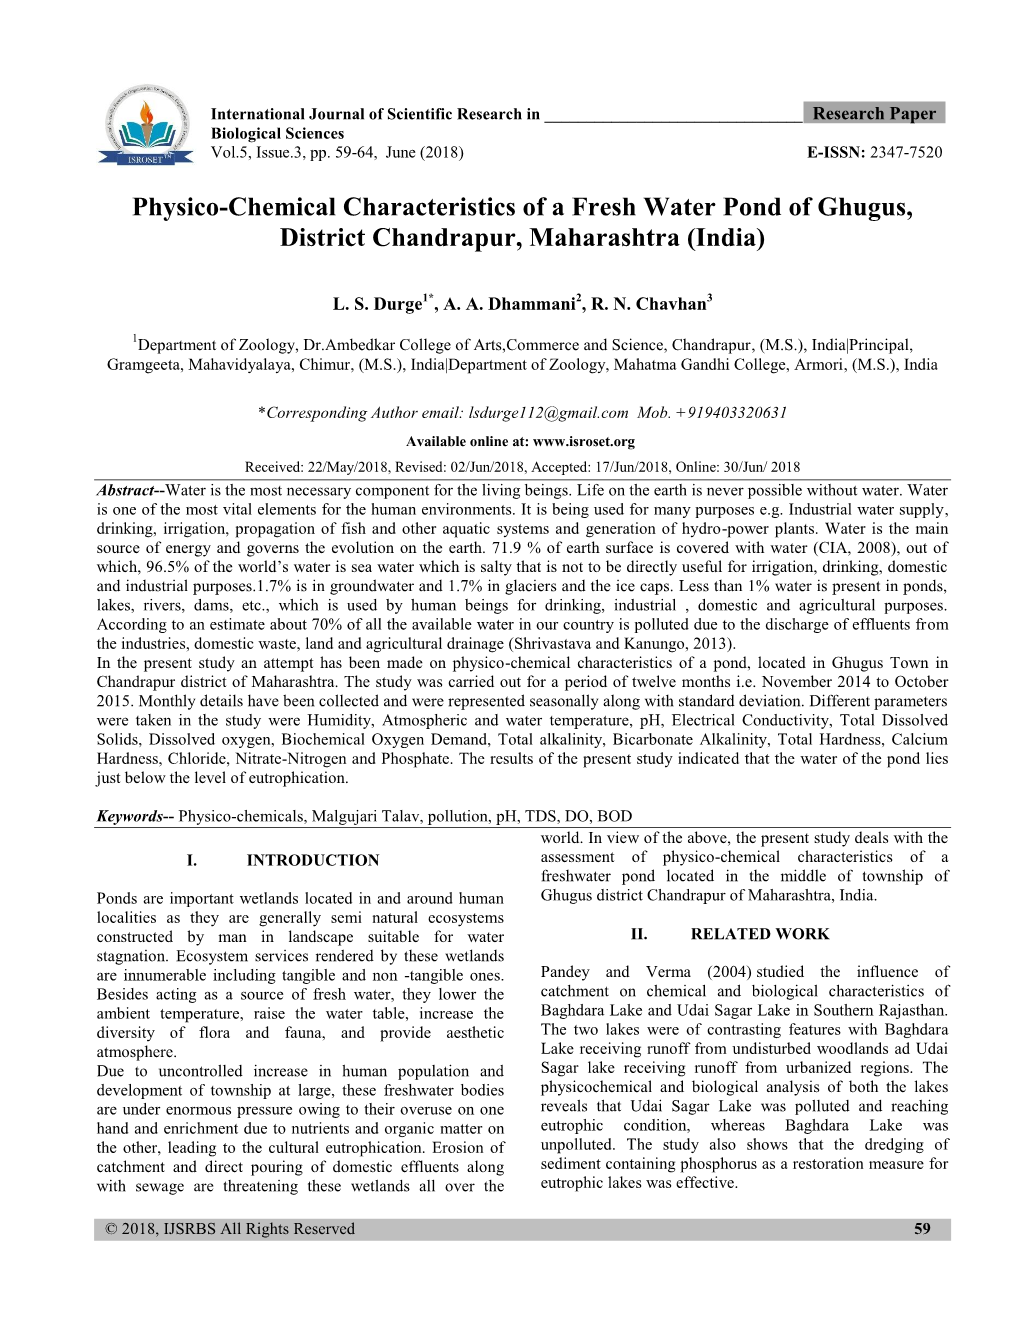 Physico-Chemical Characteristics of a Fresh Water Pond of Ghugus, District Chandrapur, Maharashtra (India)